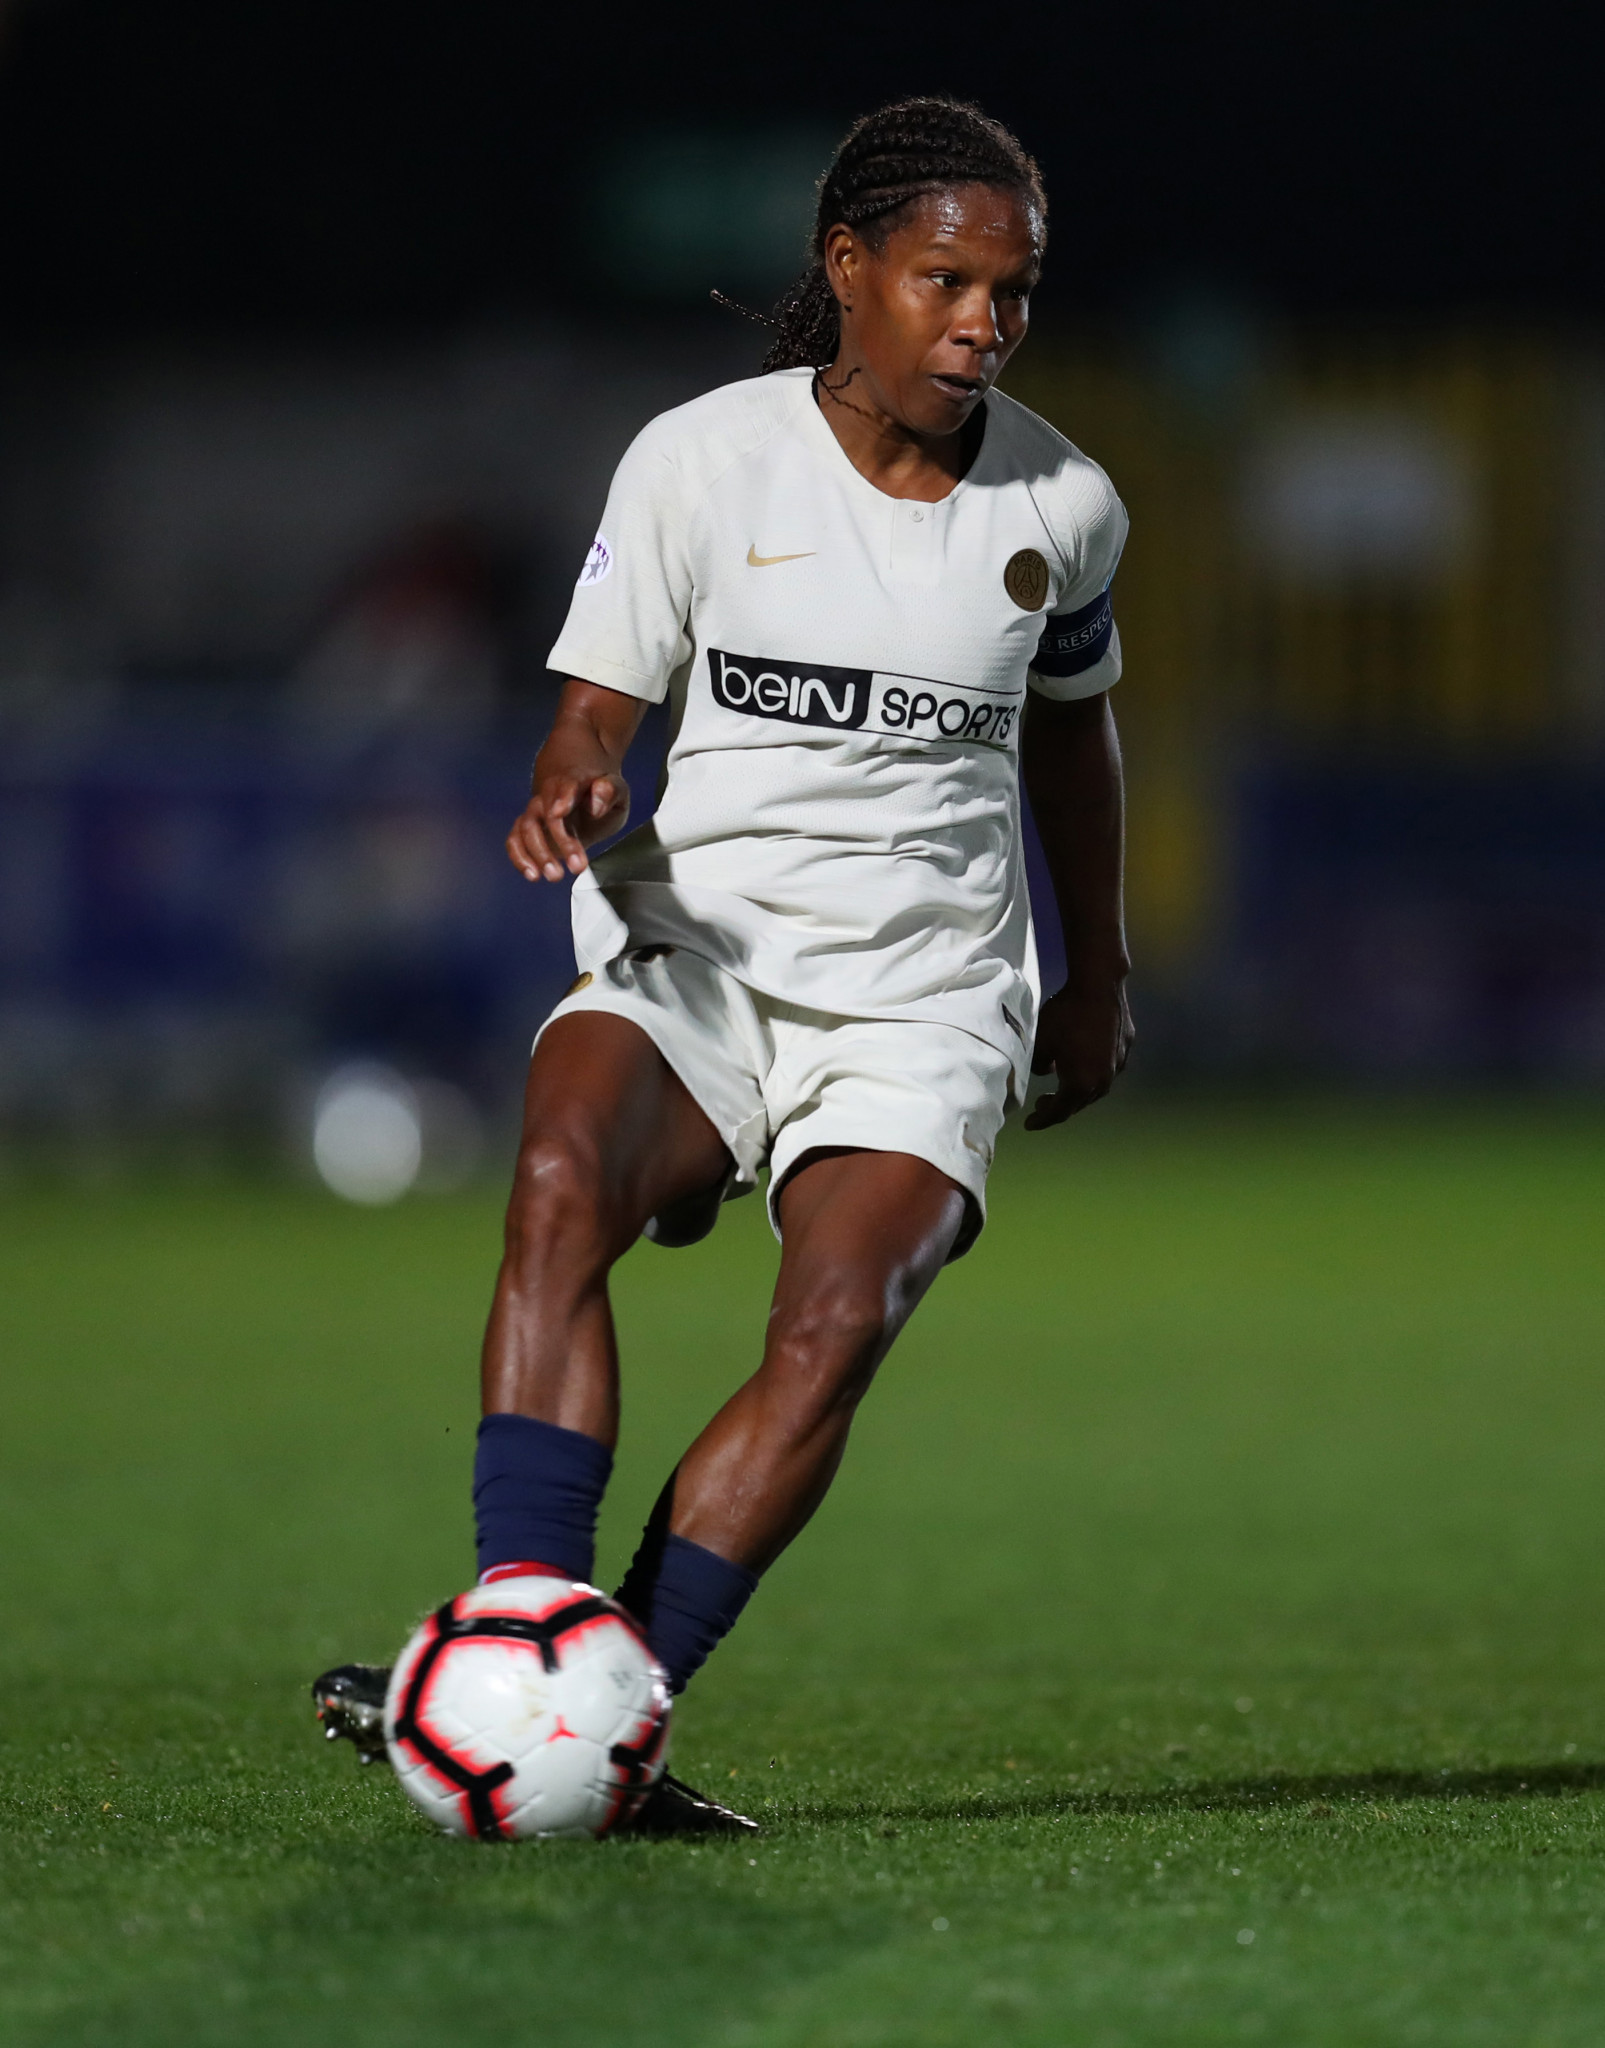 Formiga has signed a contract extension with French team Paris Saint-Germain until 2021 ©Getty Images